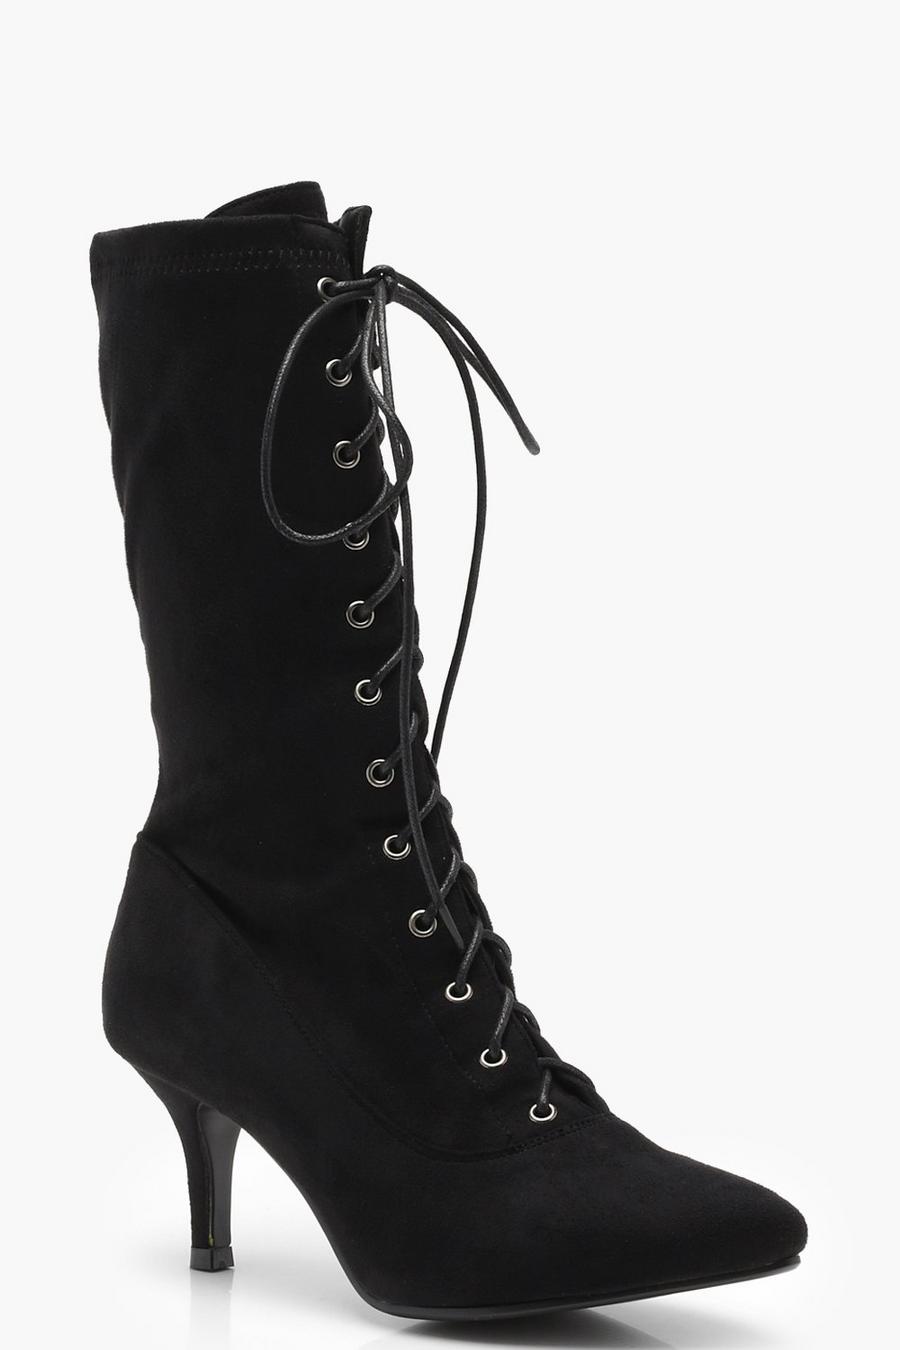 Black Zoe Lace Up Pointed Kitten Heel Shoe Boots image number 1